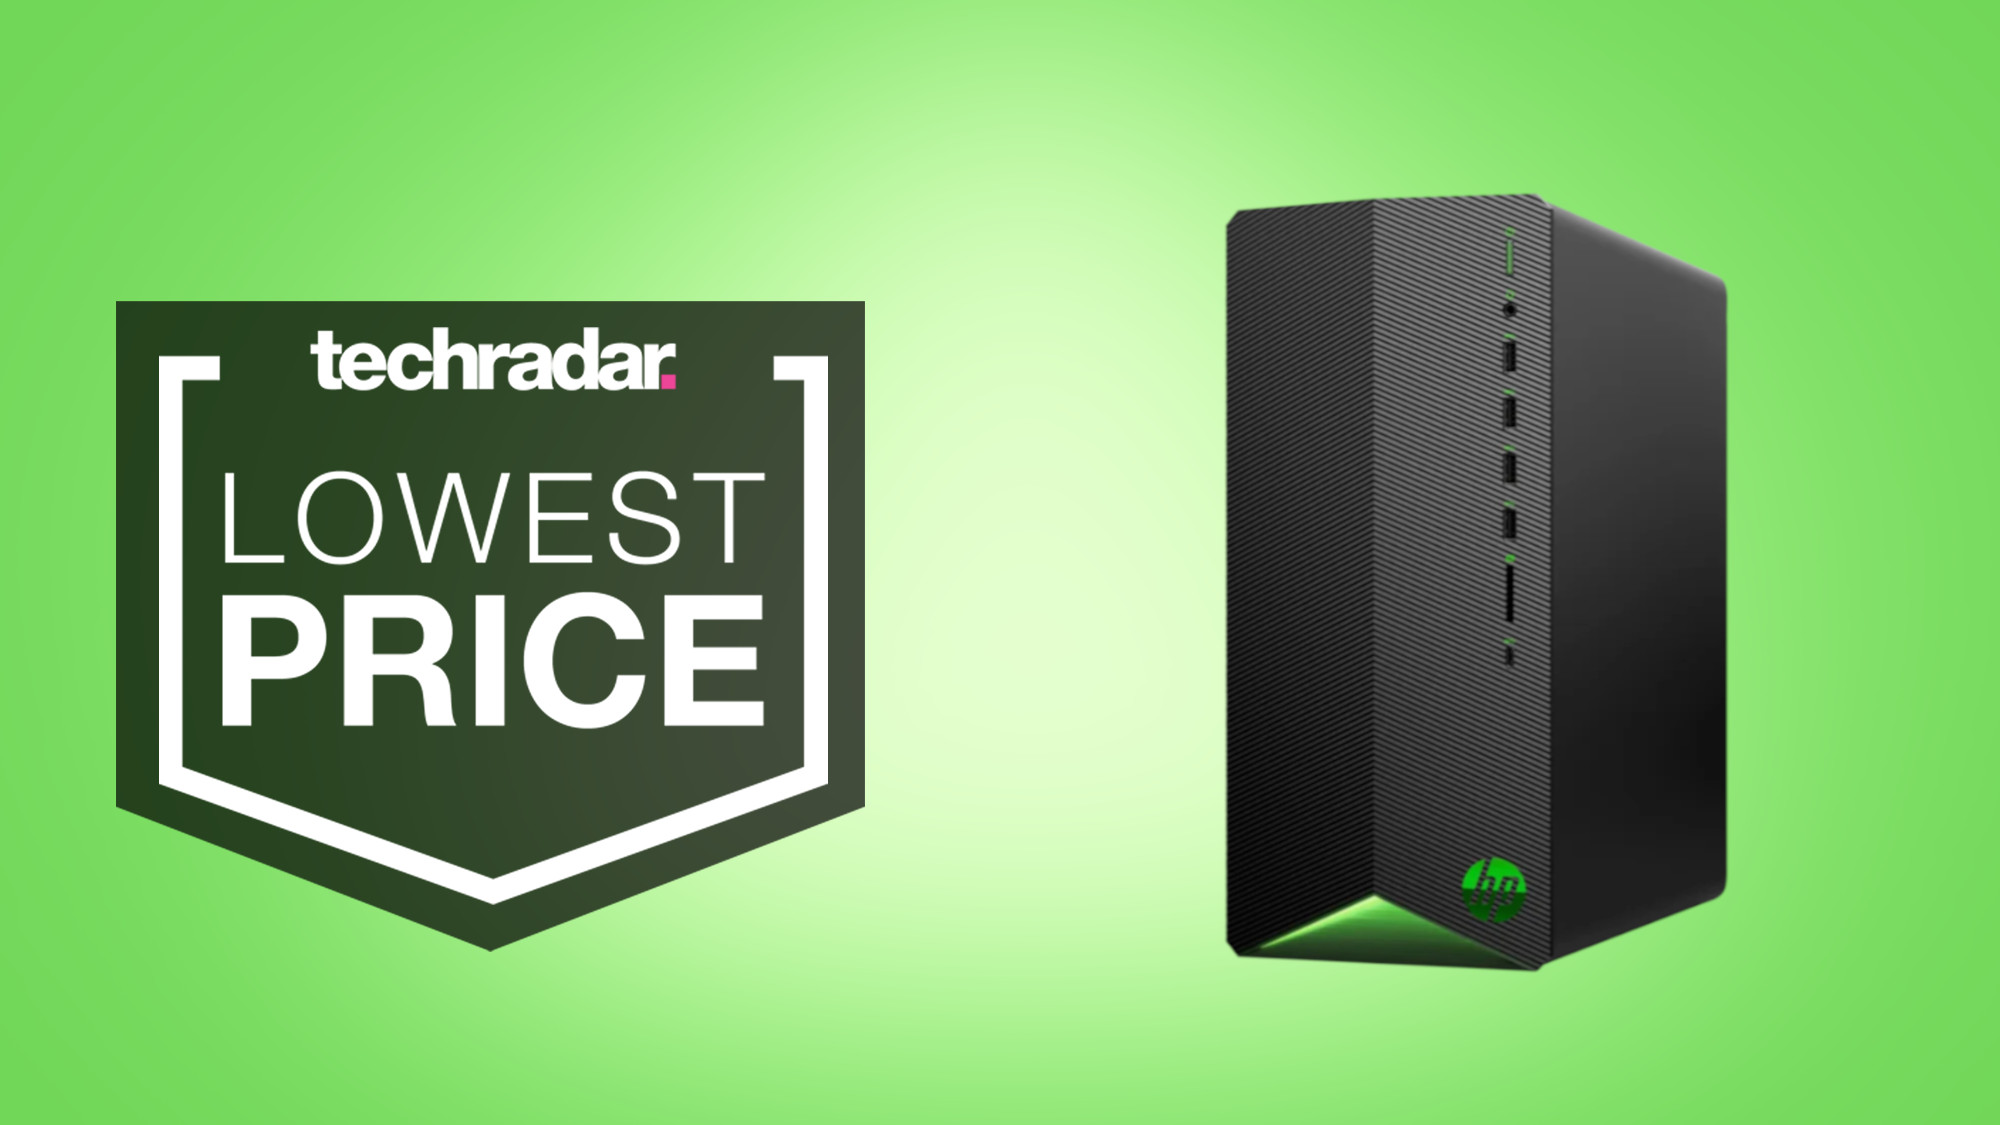 Unbeatable Value This Cheap Gaming Pc With An Rtx 3060 Ti Is Just 824